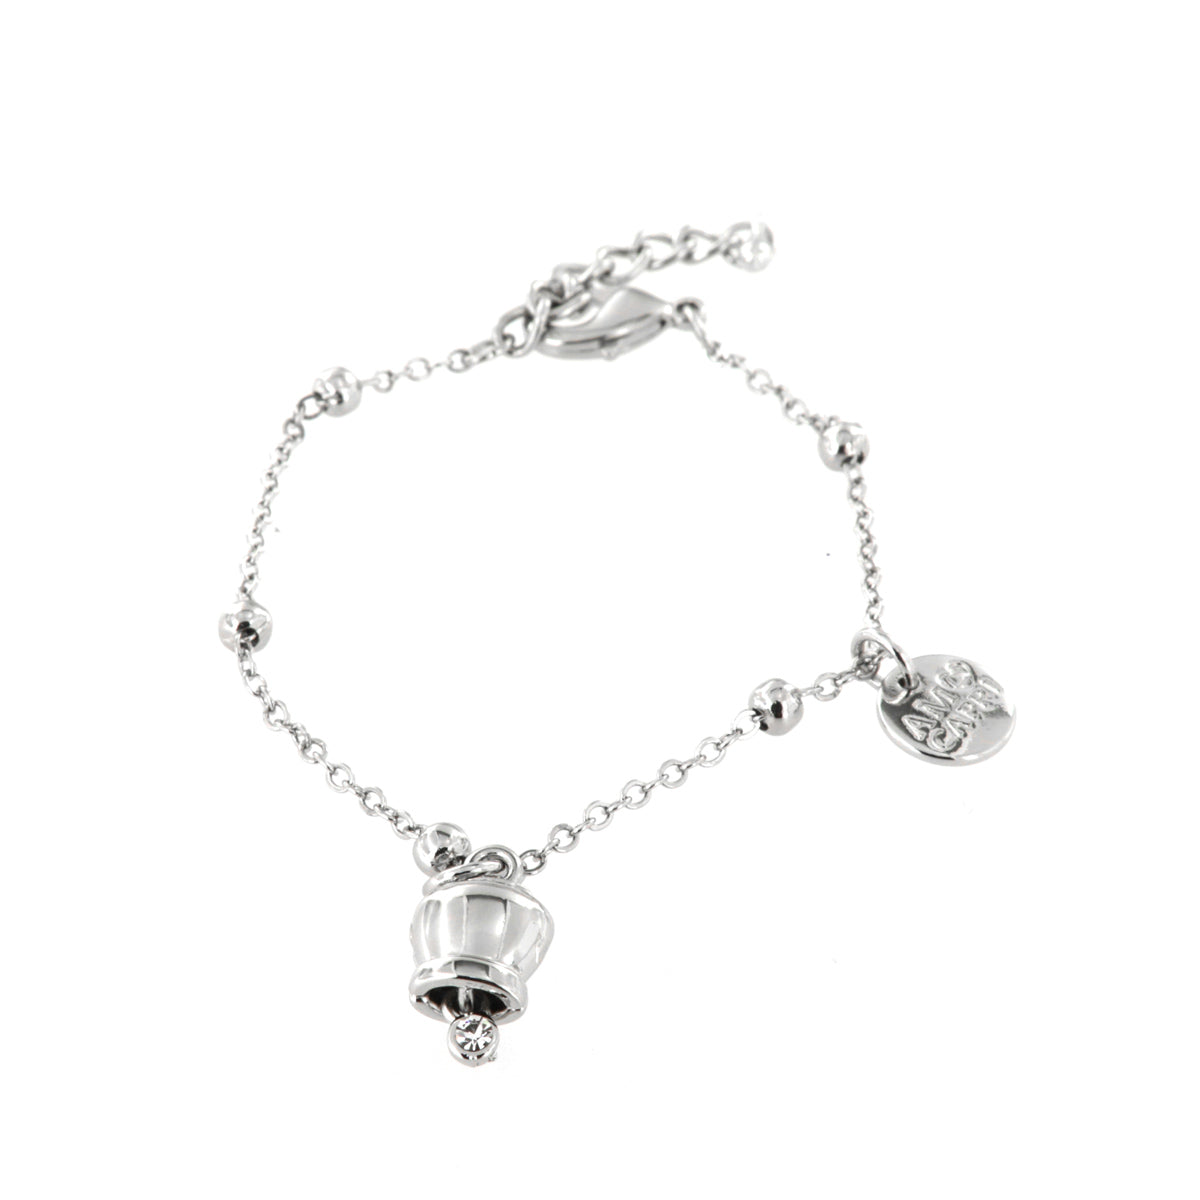 Metal bracelet with pendant charcofish bell, embellished with light point